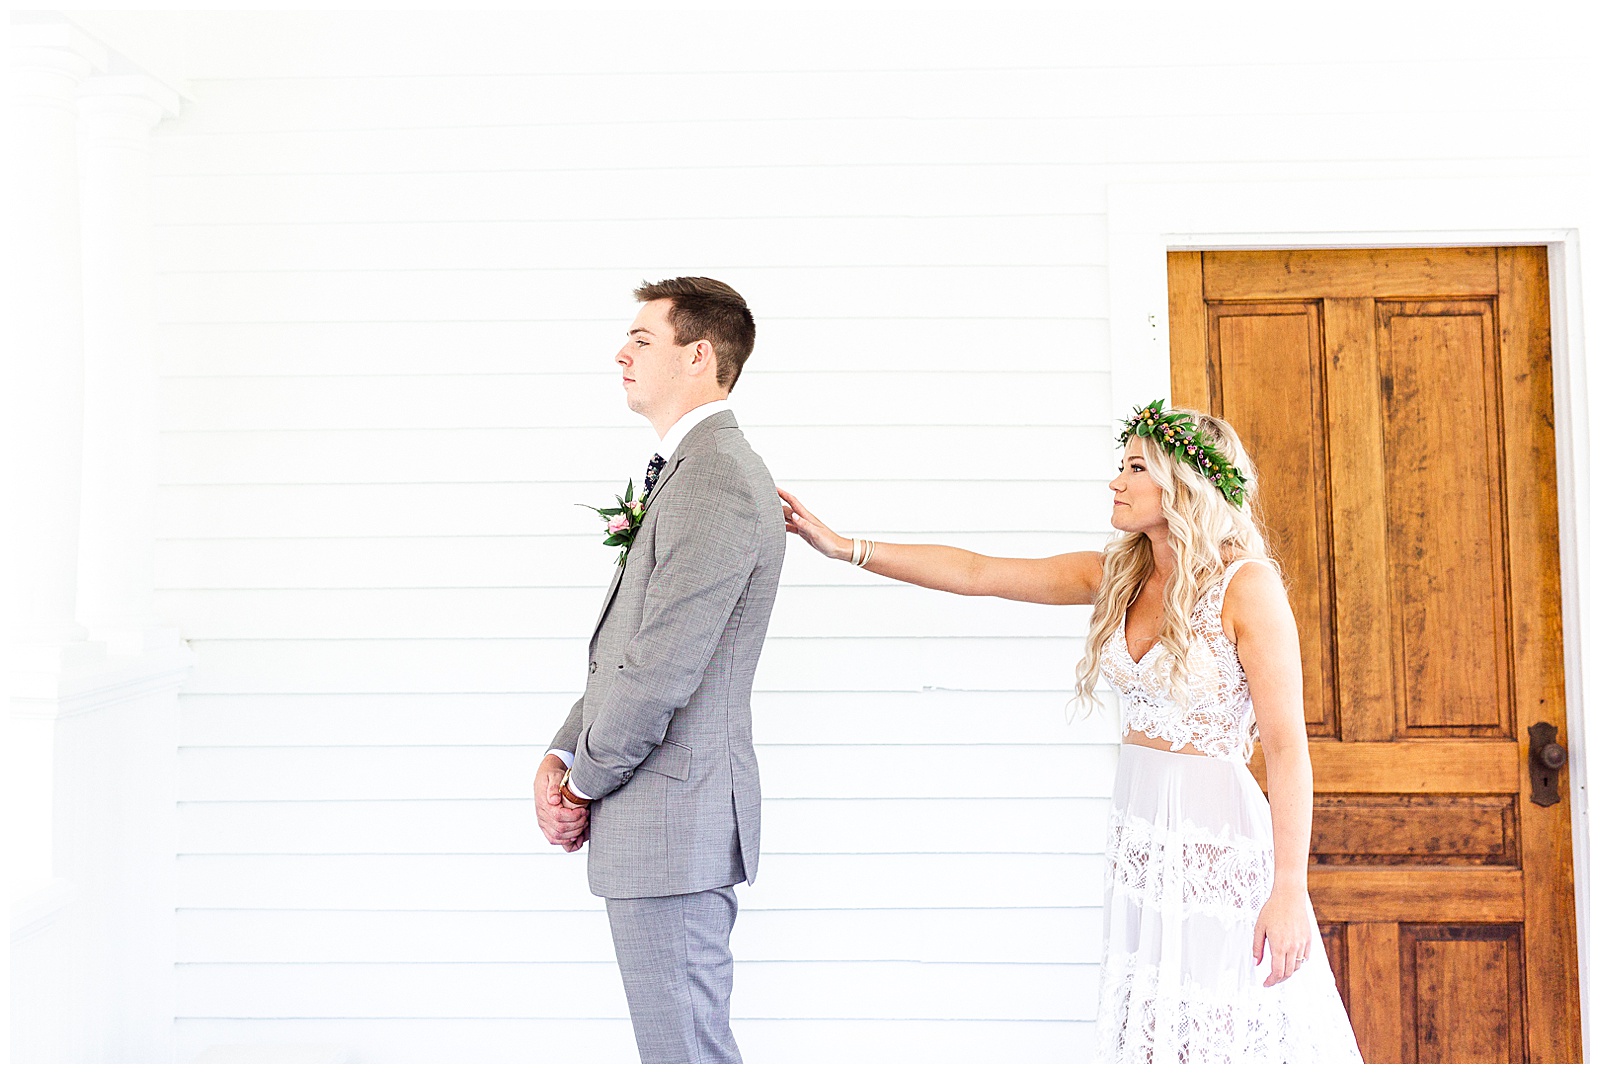 Emotional First Look from Enchanting Boho Chic Wedding in Charlotte, NC | check out the full wedding at KevynDixonPhoto.com